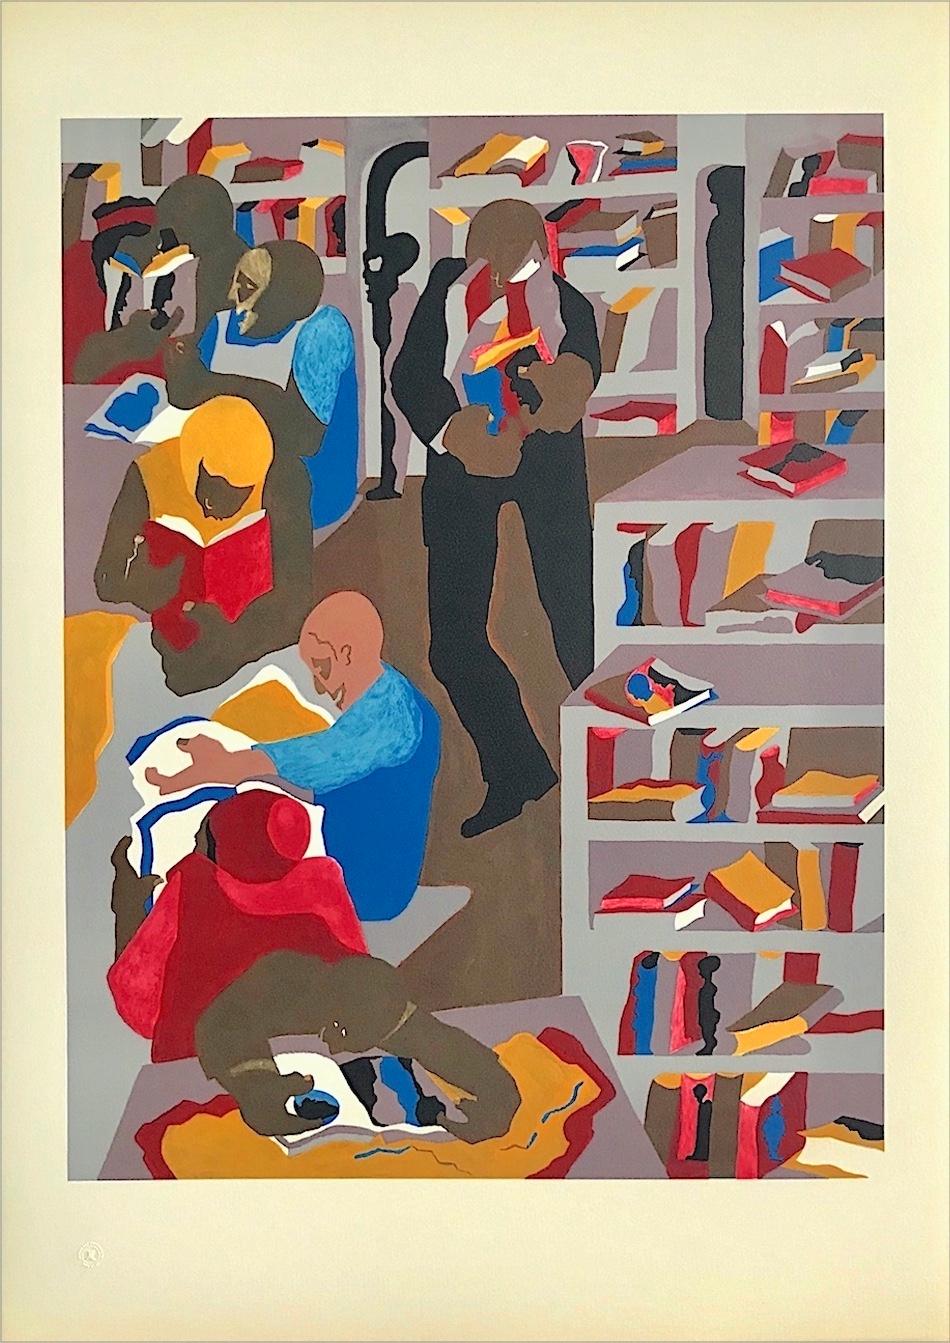 SCHOMBURG LIBRARY Lithograph, African American History, Black Culture, Books - Print by Jacob Lawrence